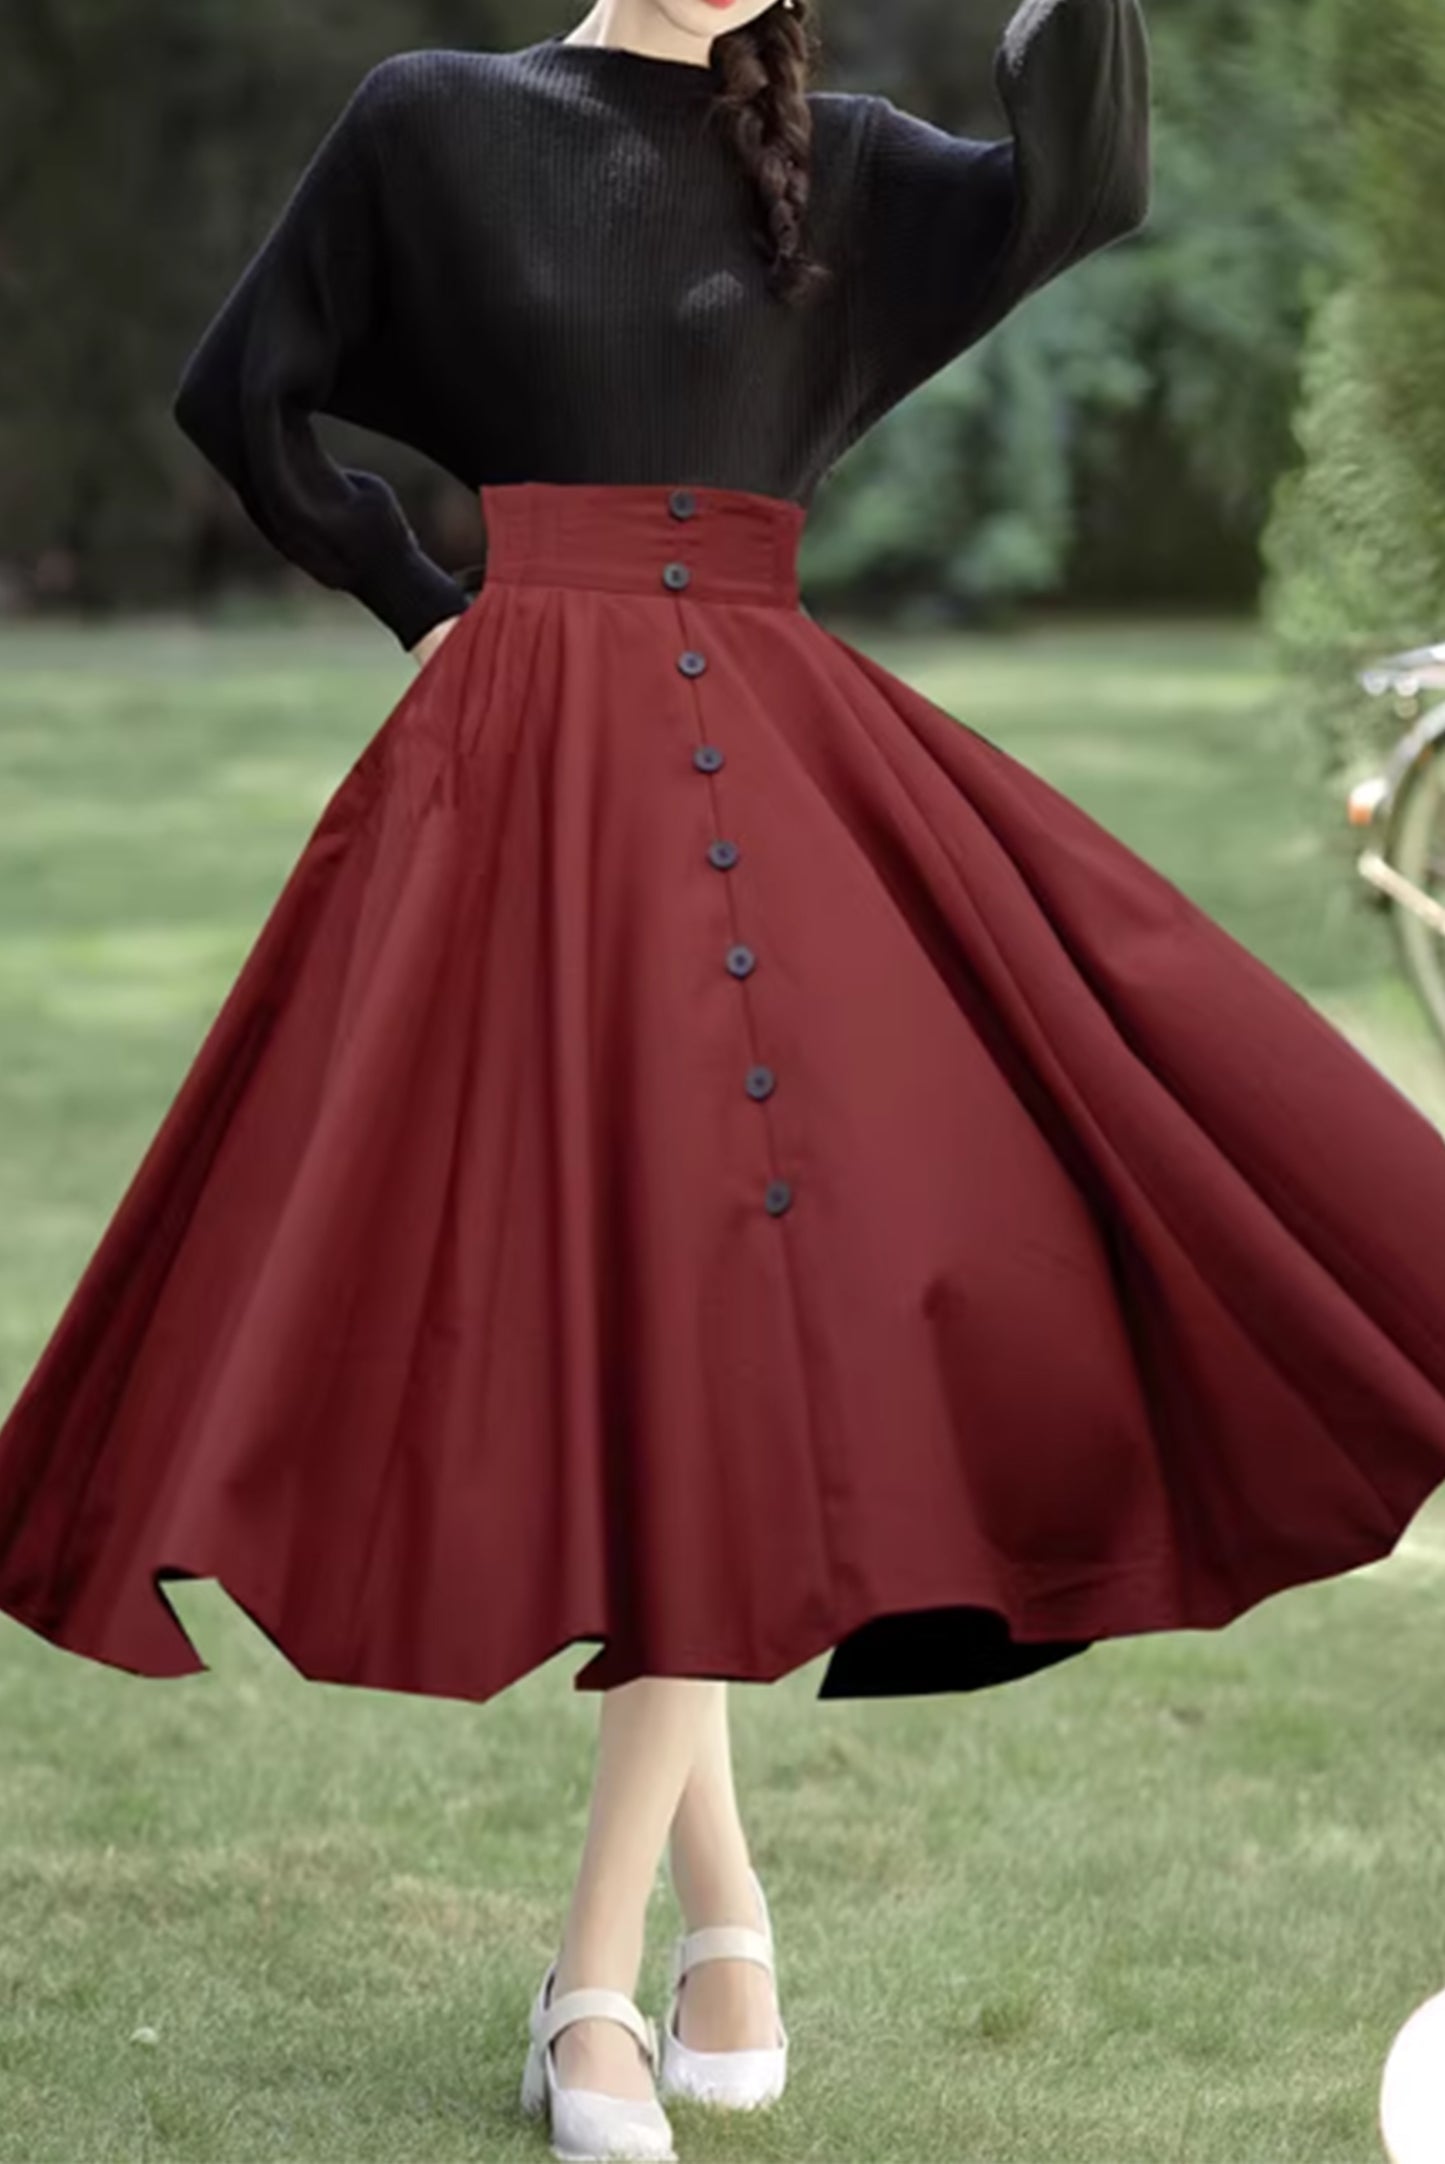 Swing womens skirt with buttons decoration 4869